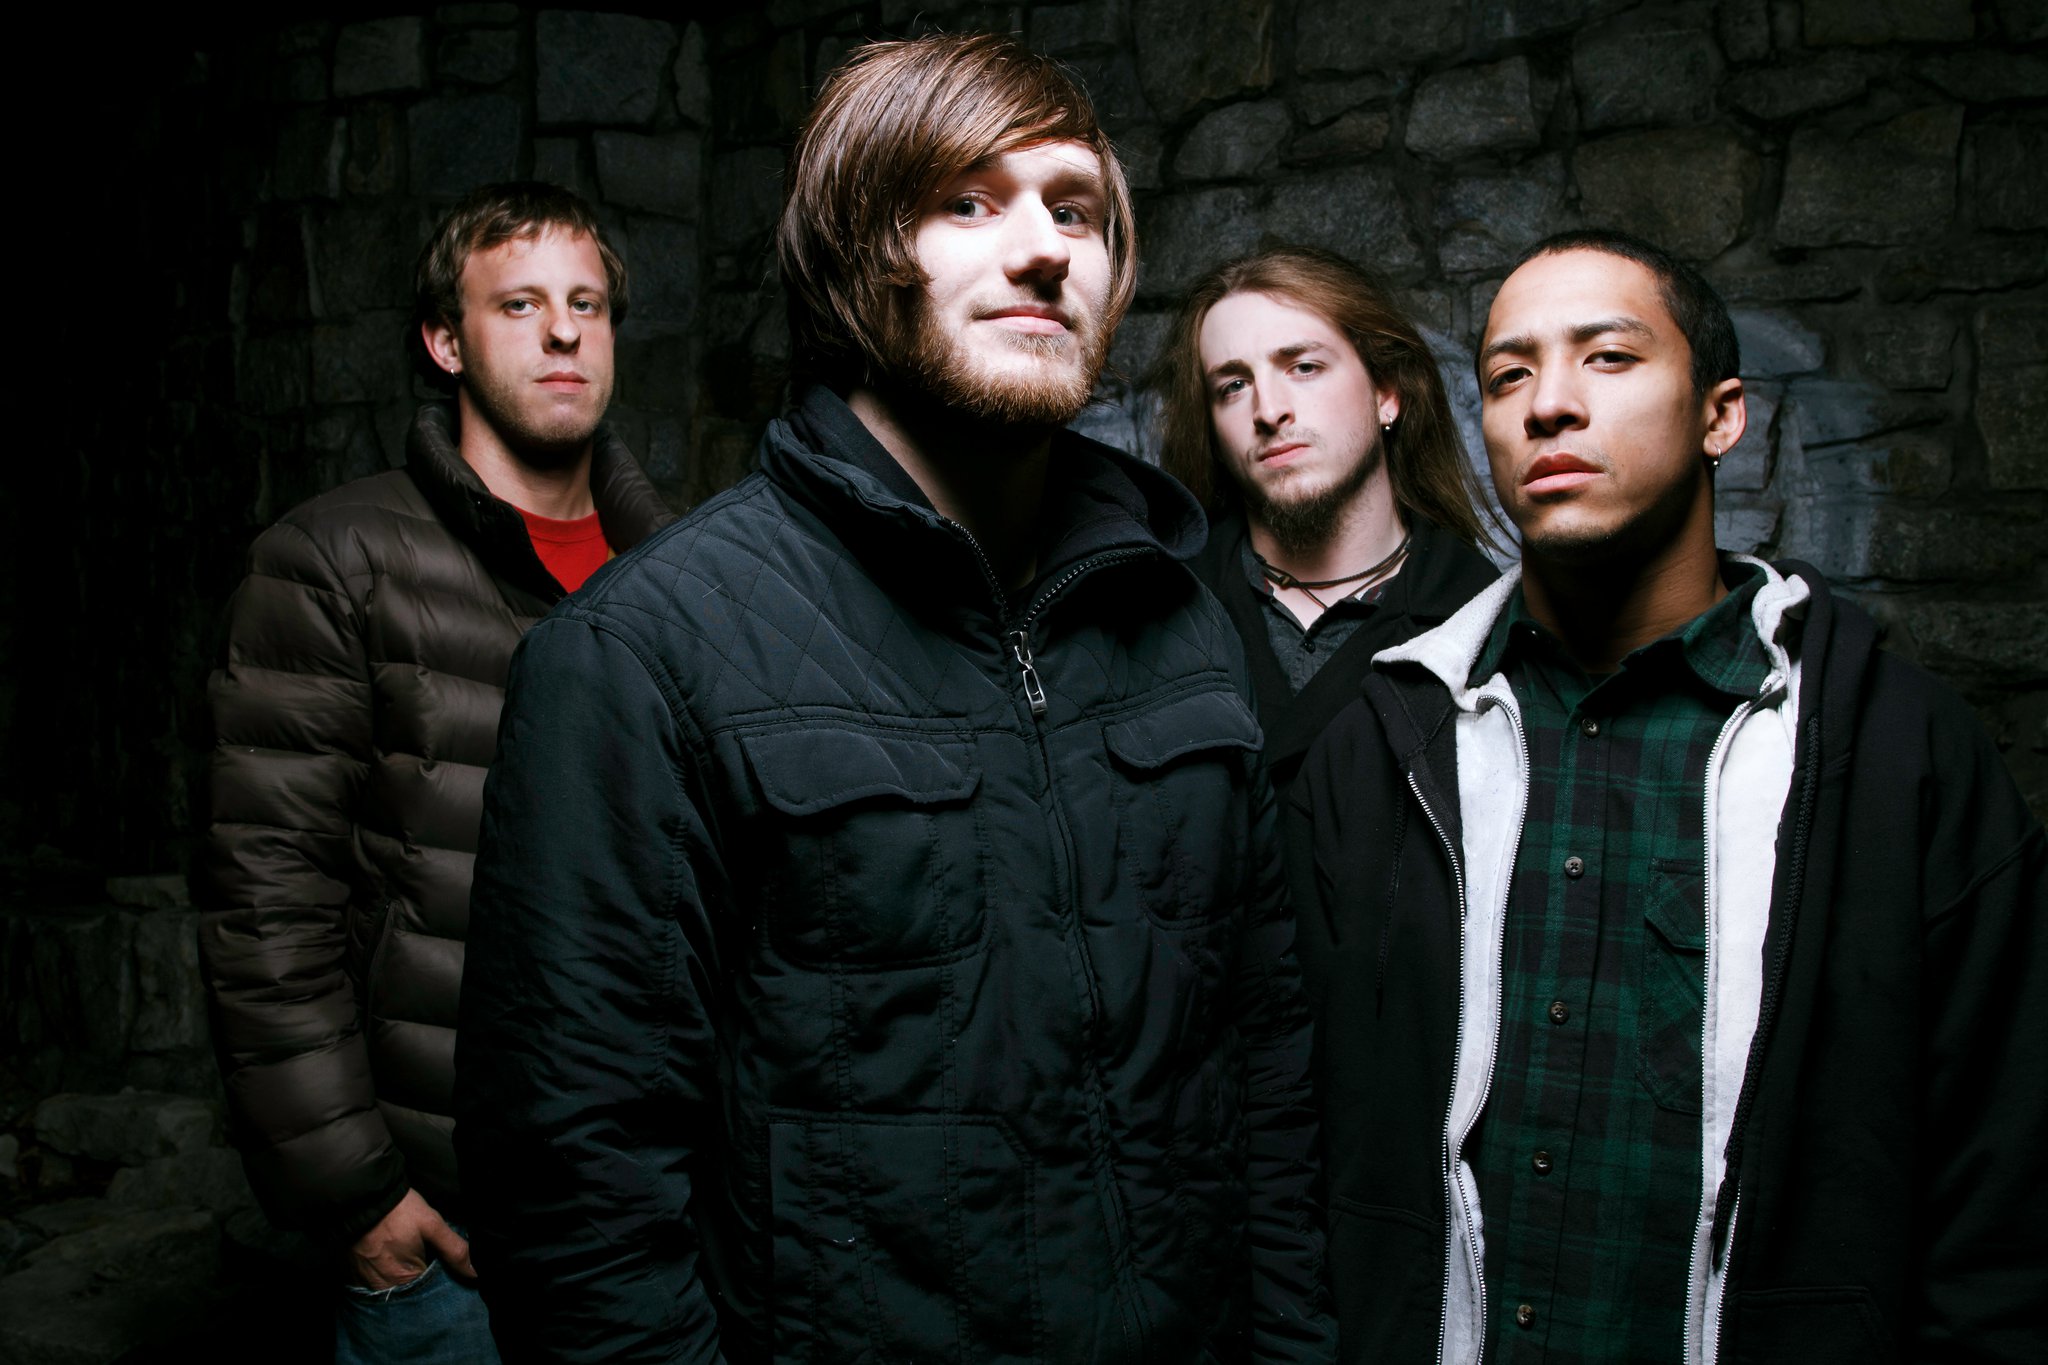 Amazing Veil Of Maya Pictures & Backgrounds